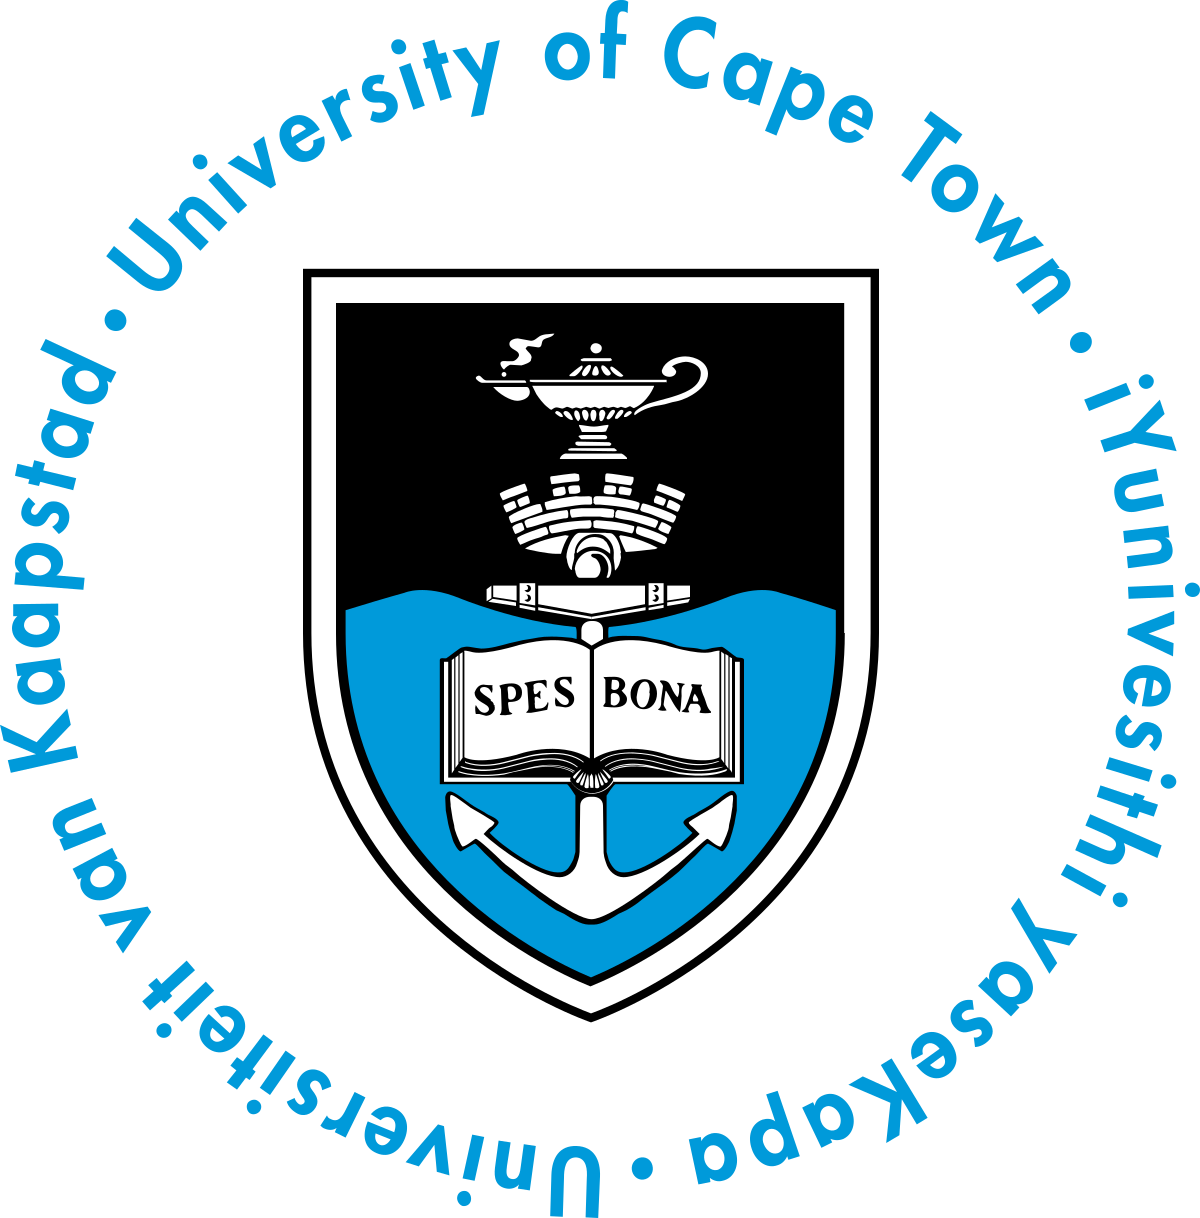 Sean Lucas - Head of Rugby Strength & Conditioning - University of Cape Town